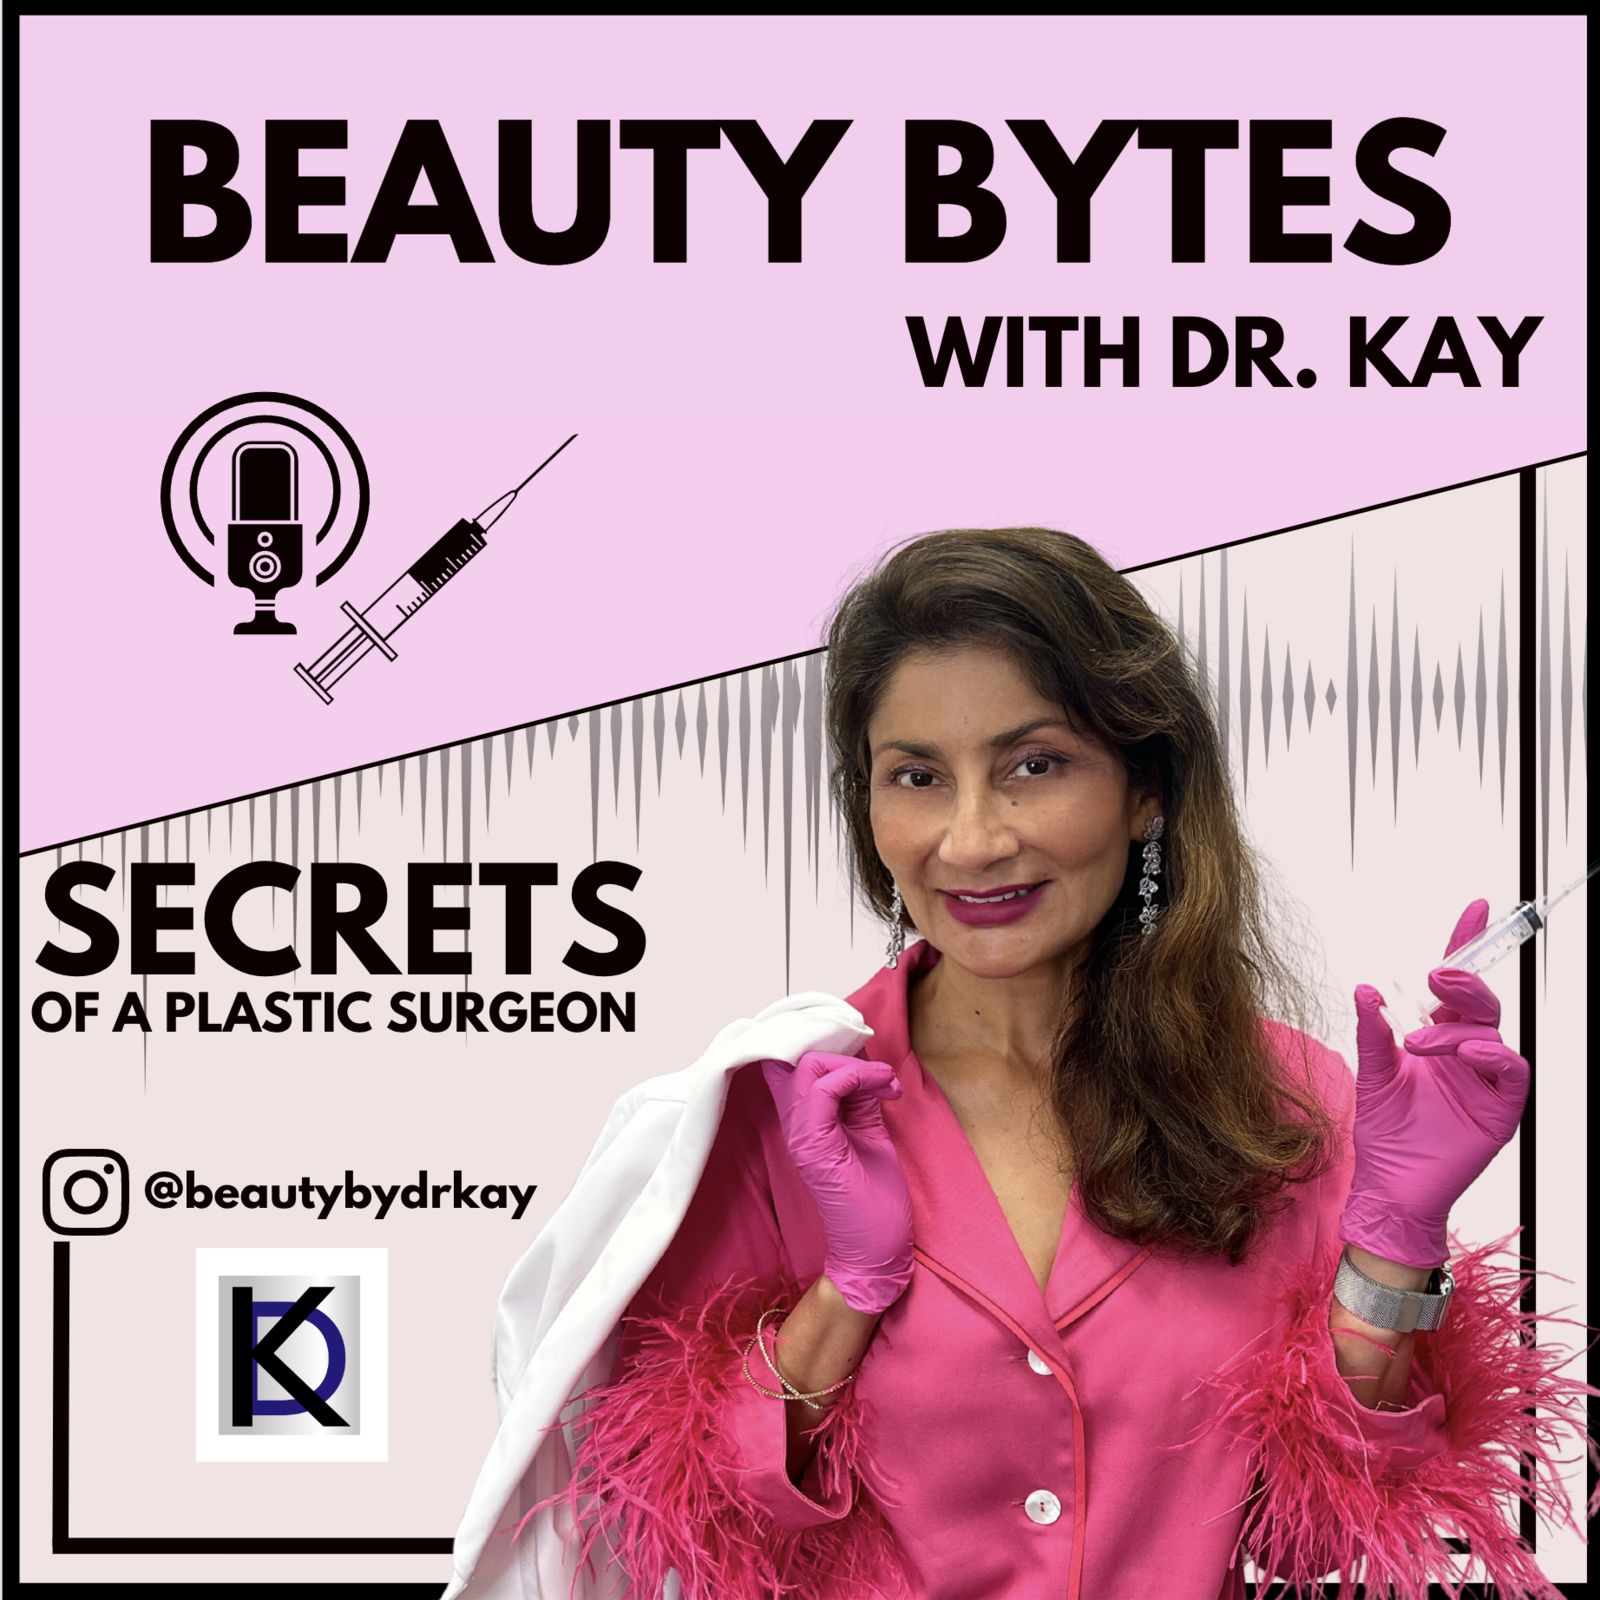 Beauty Bytes with Dr. Kay: Secrets of a Plastic Surgeon